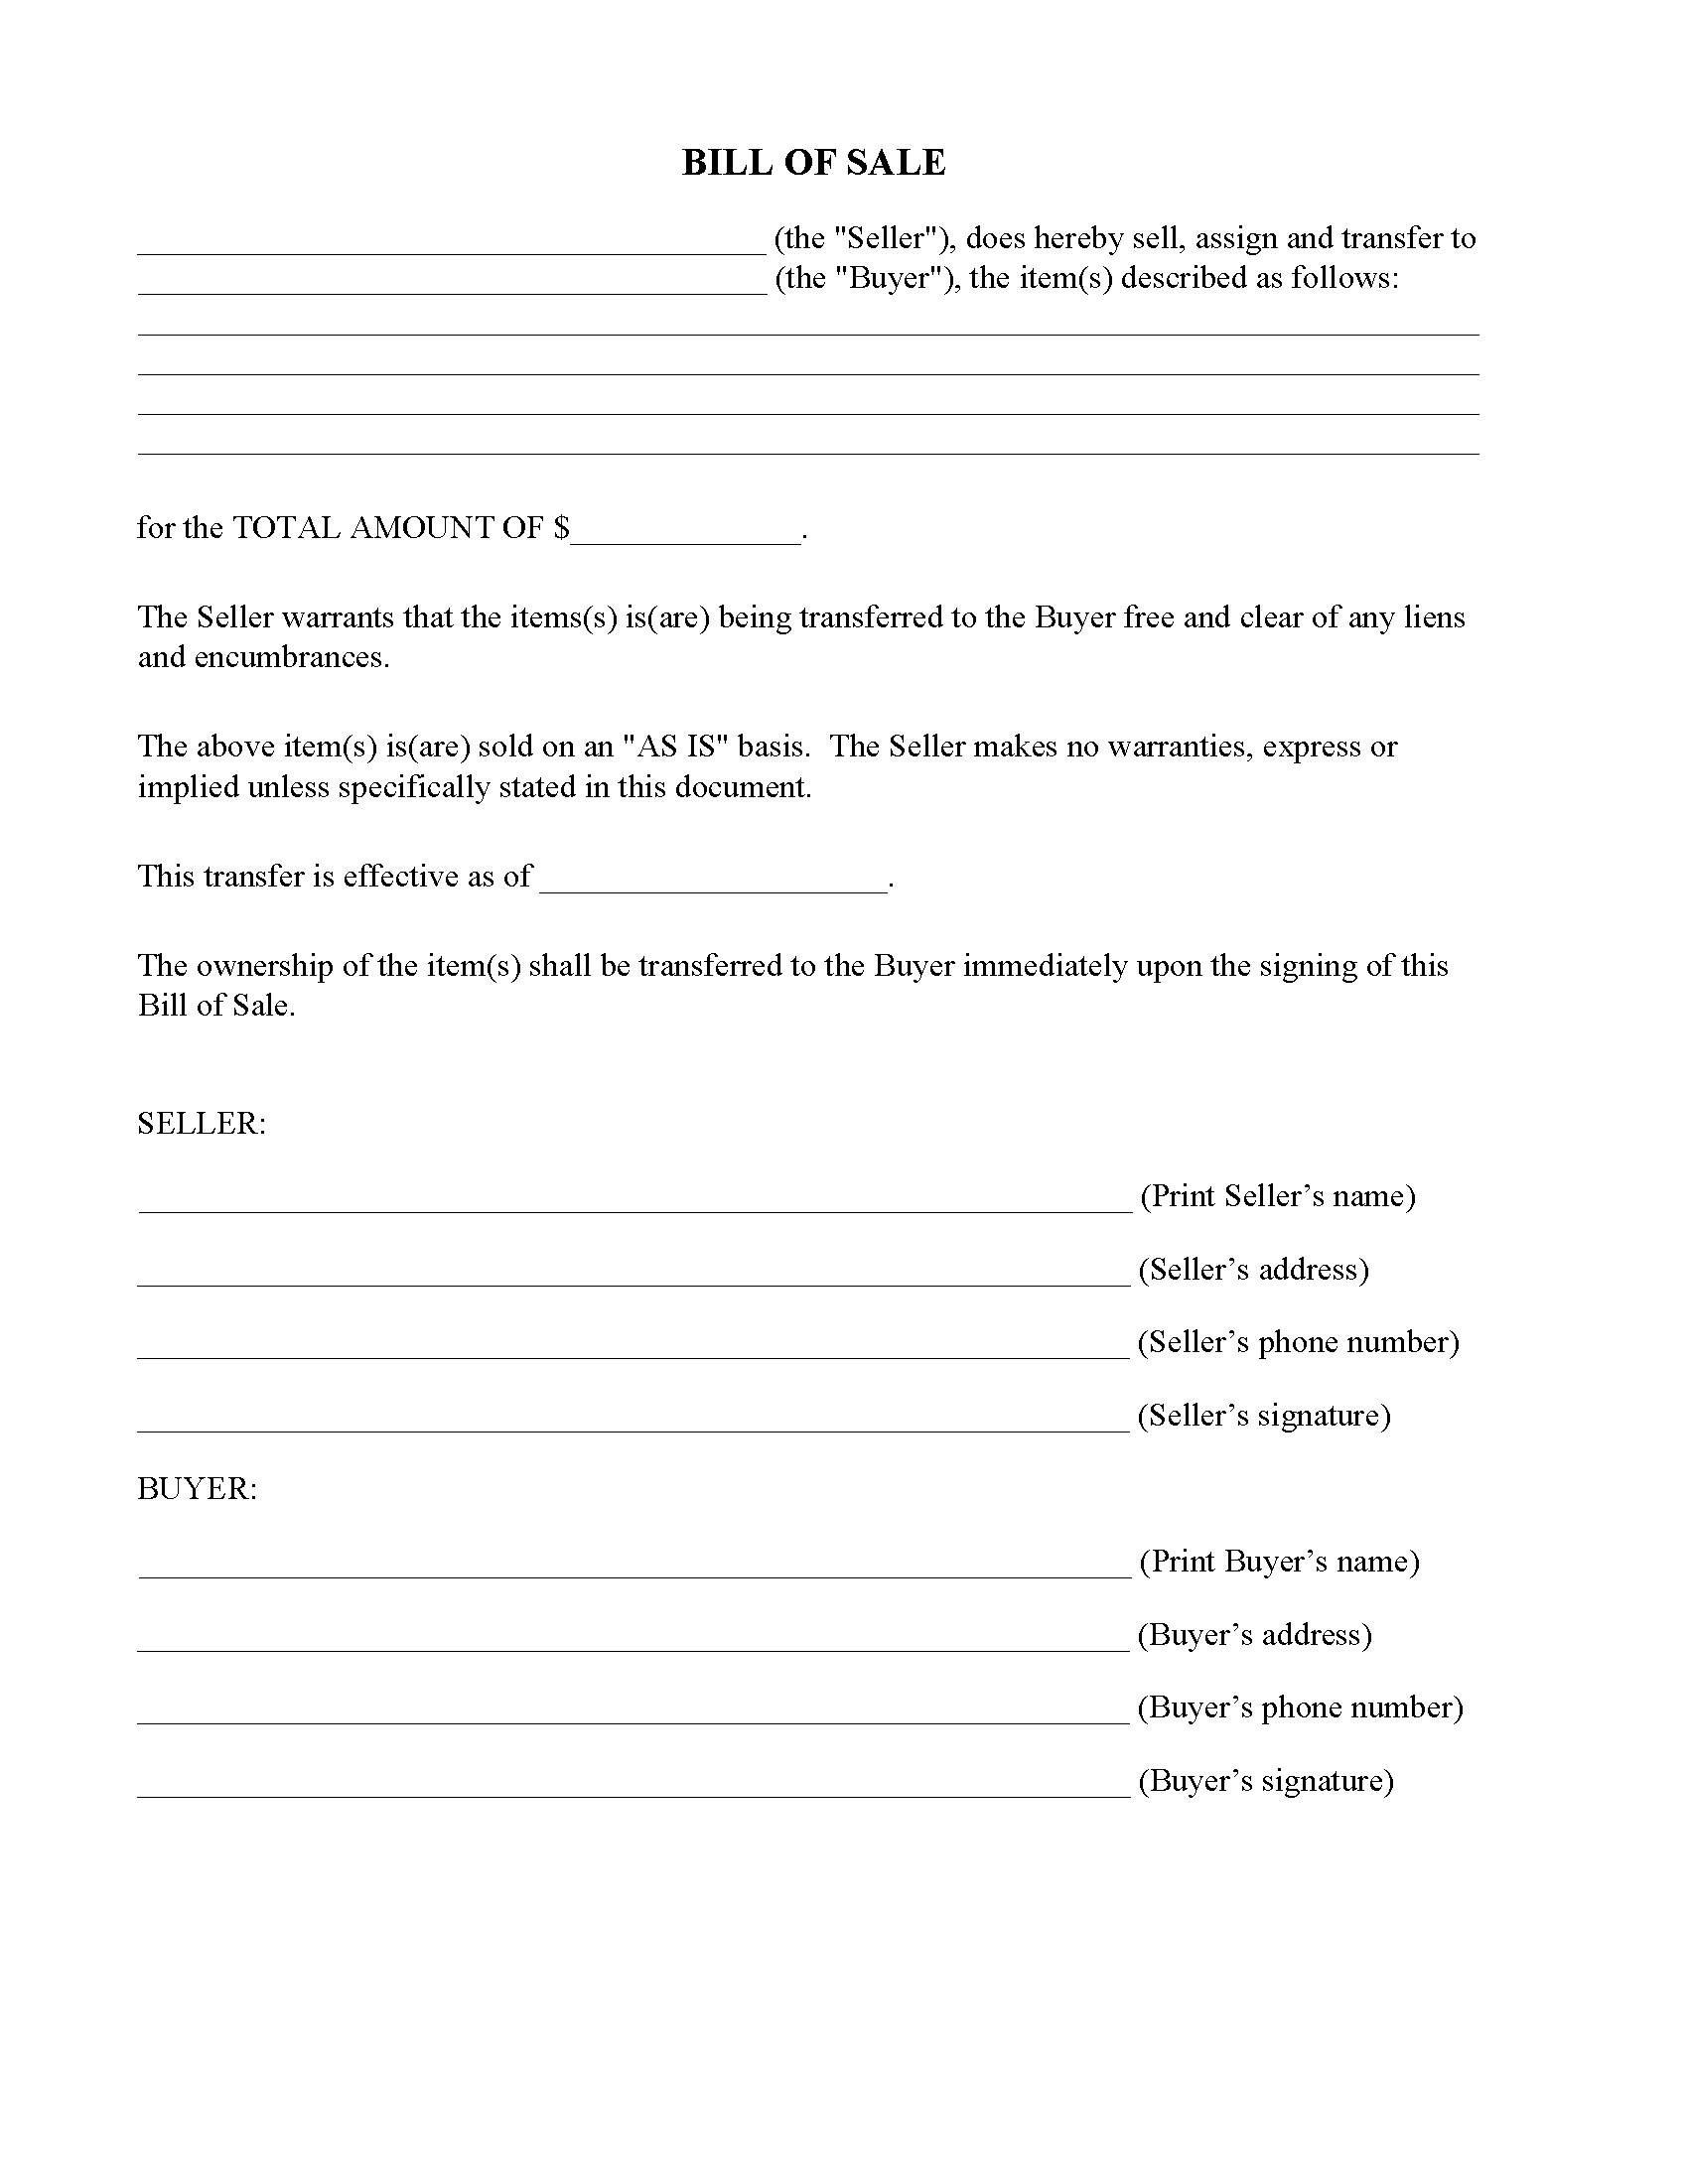 Missouri Simple Bill of Sale Form - Free Printable Legal Forms